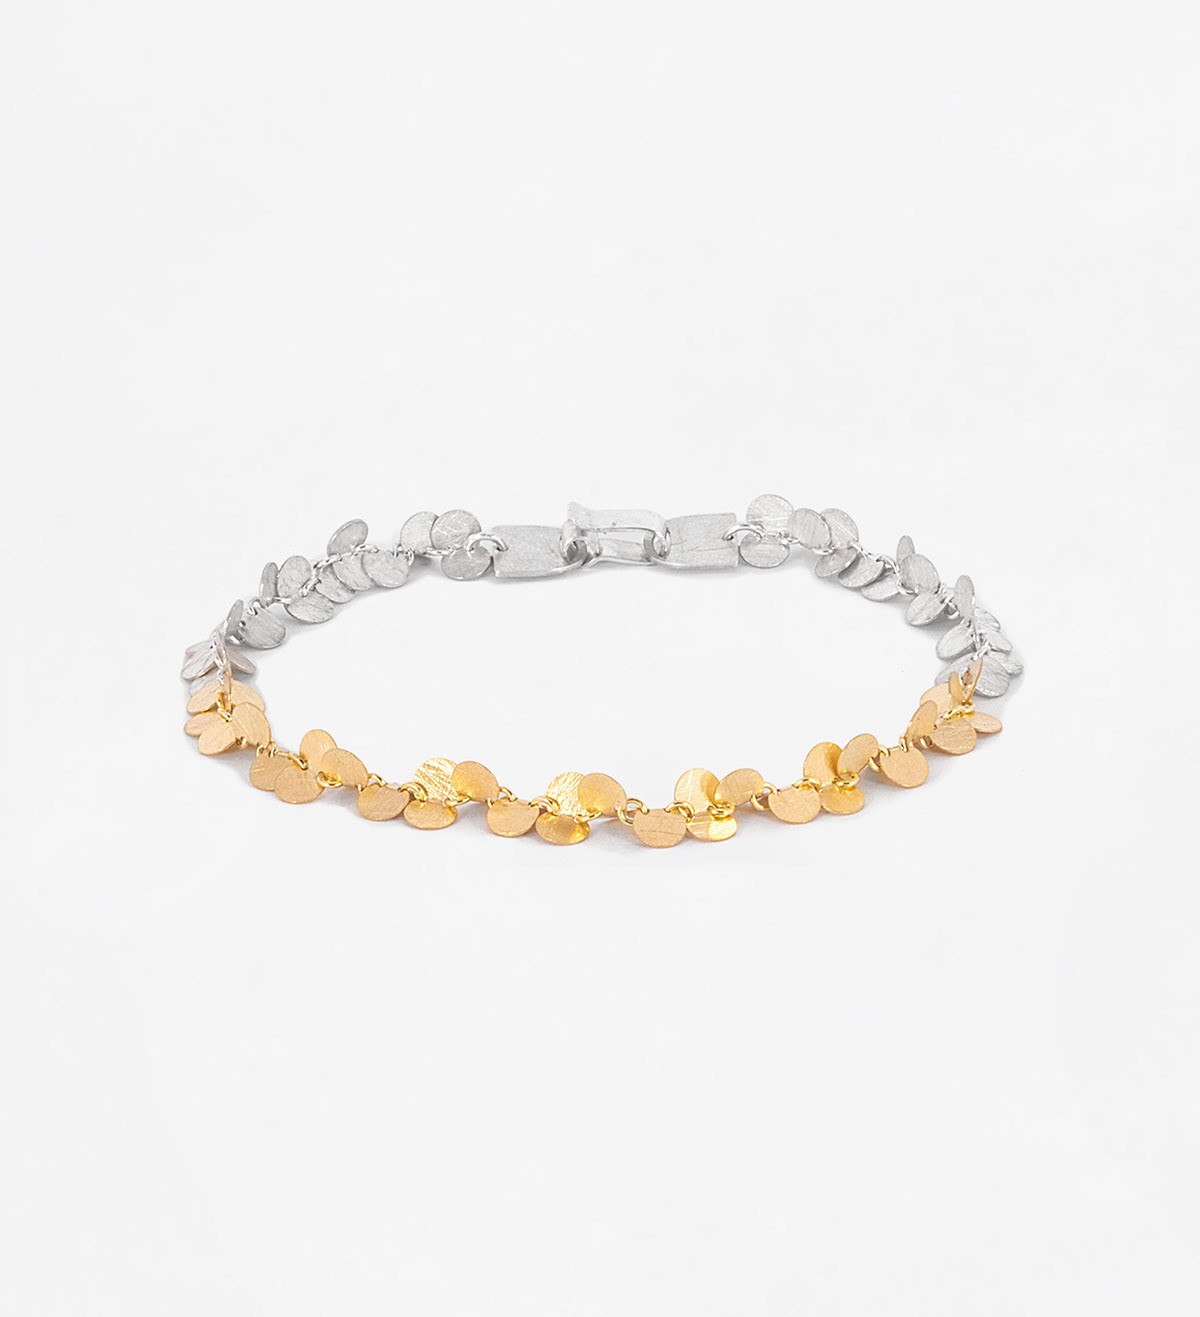 18k gold and silver bracelet Papallones 19cm